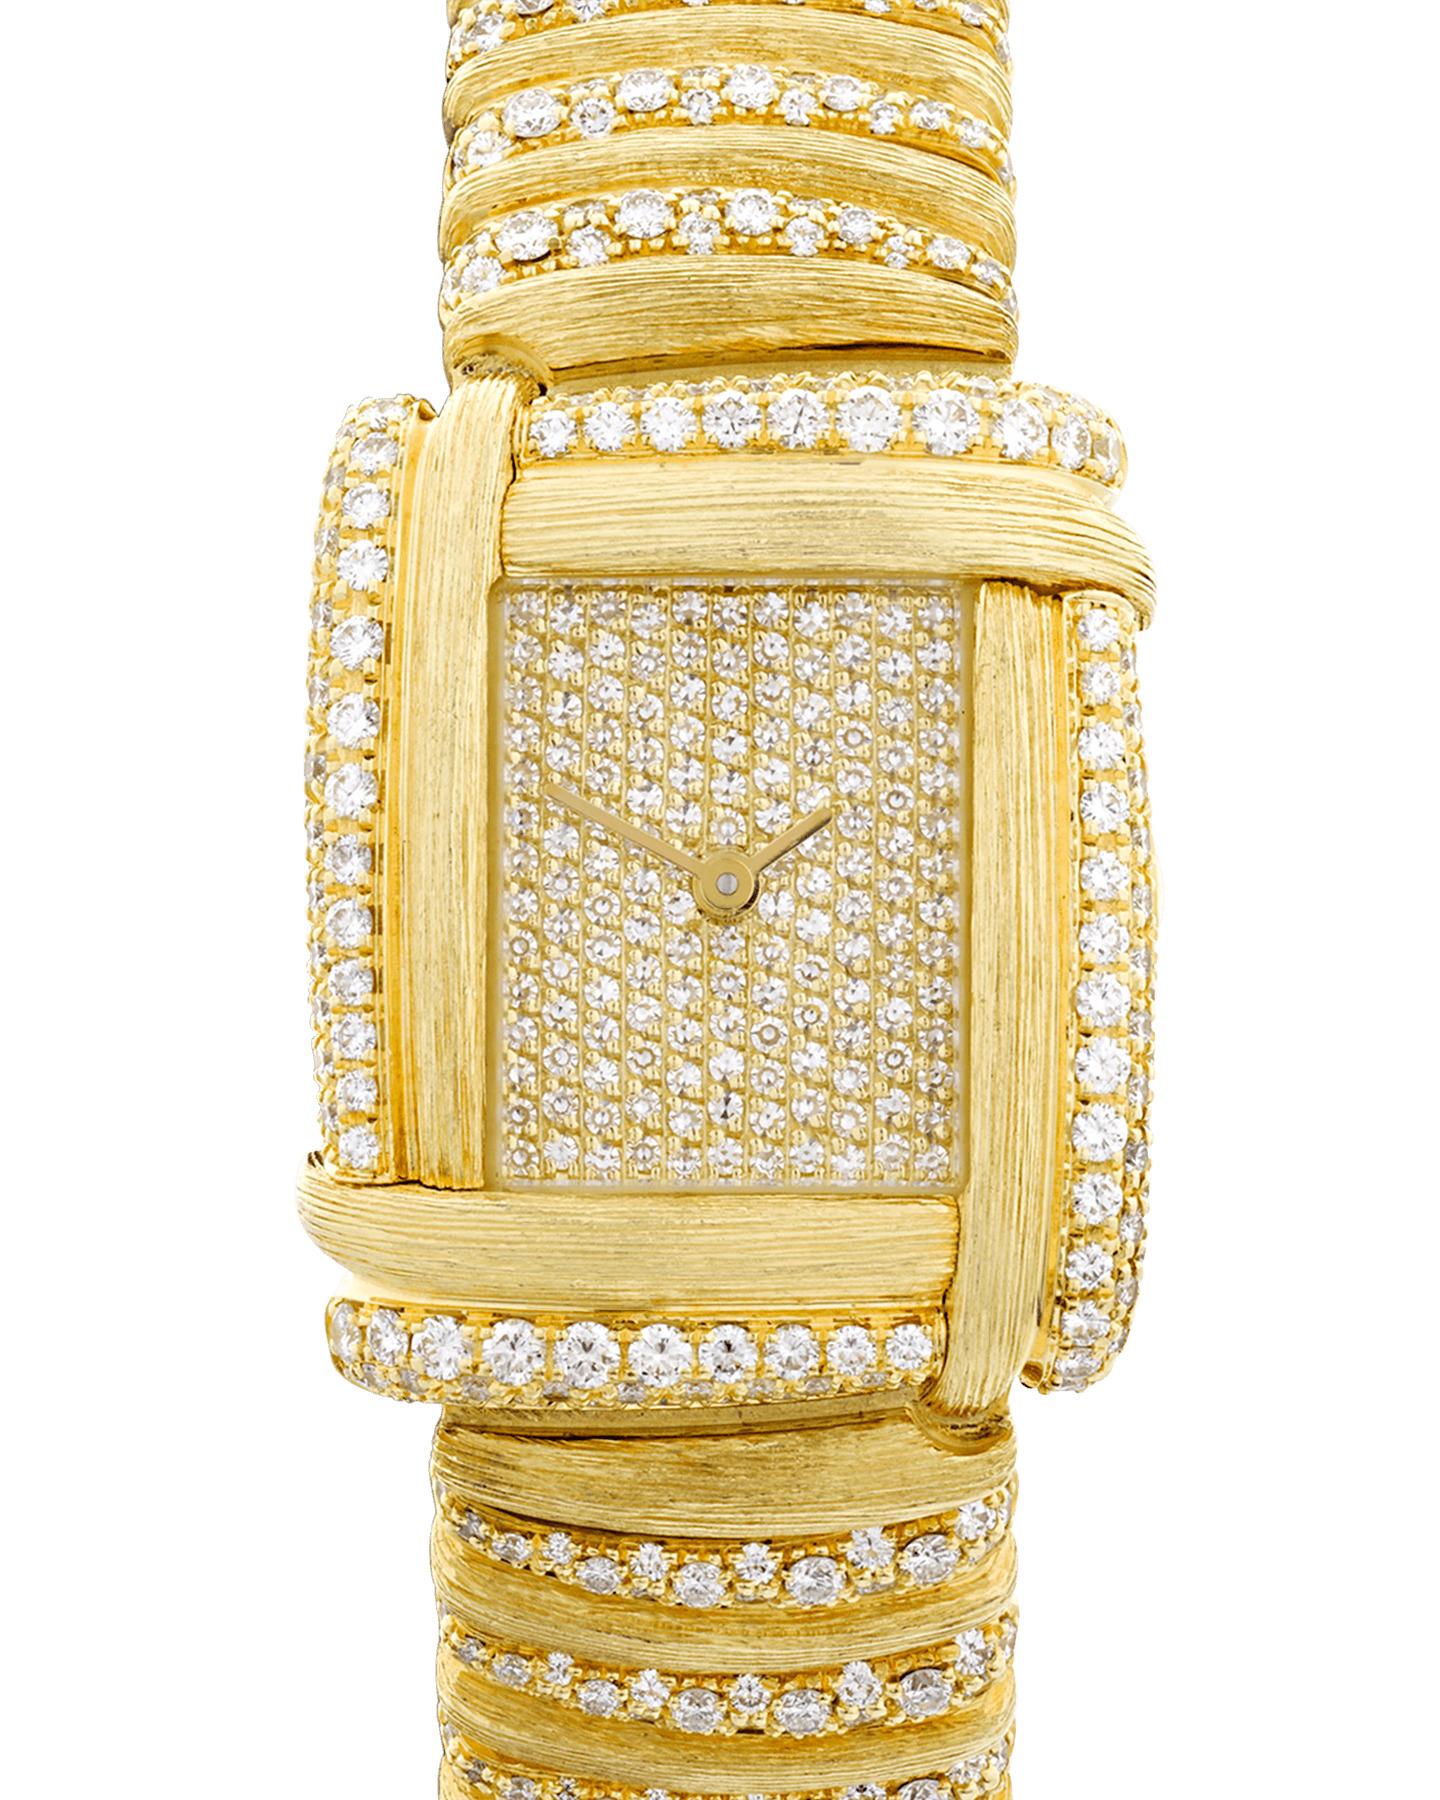 Acclaimed American jeweler and goldsmith Henry Dunay crafted this exquisite diamond-encrusted quartz wristwatch. The intricate 18K yellow gold links feature Dunay's iconic Sabi motif, a technique that requires the utmost precision and skill to